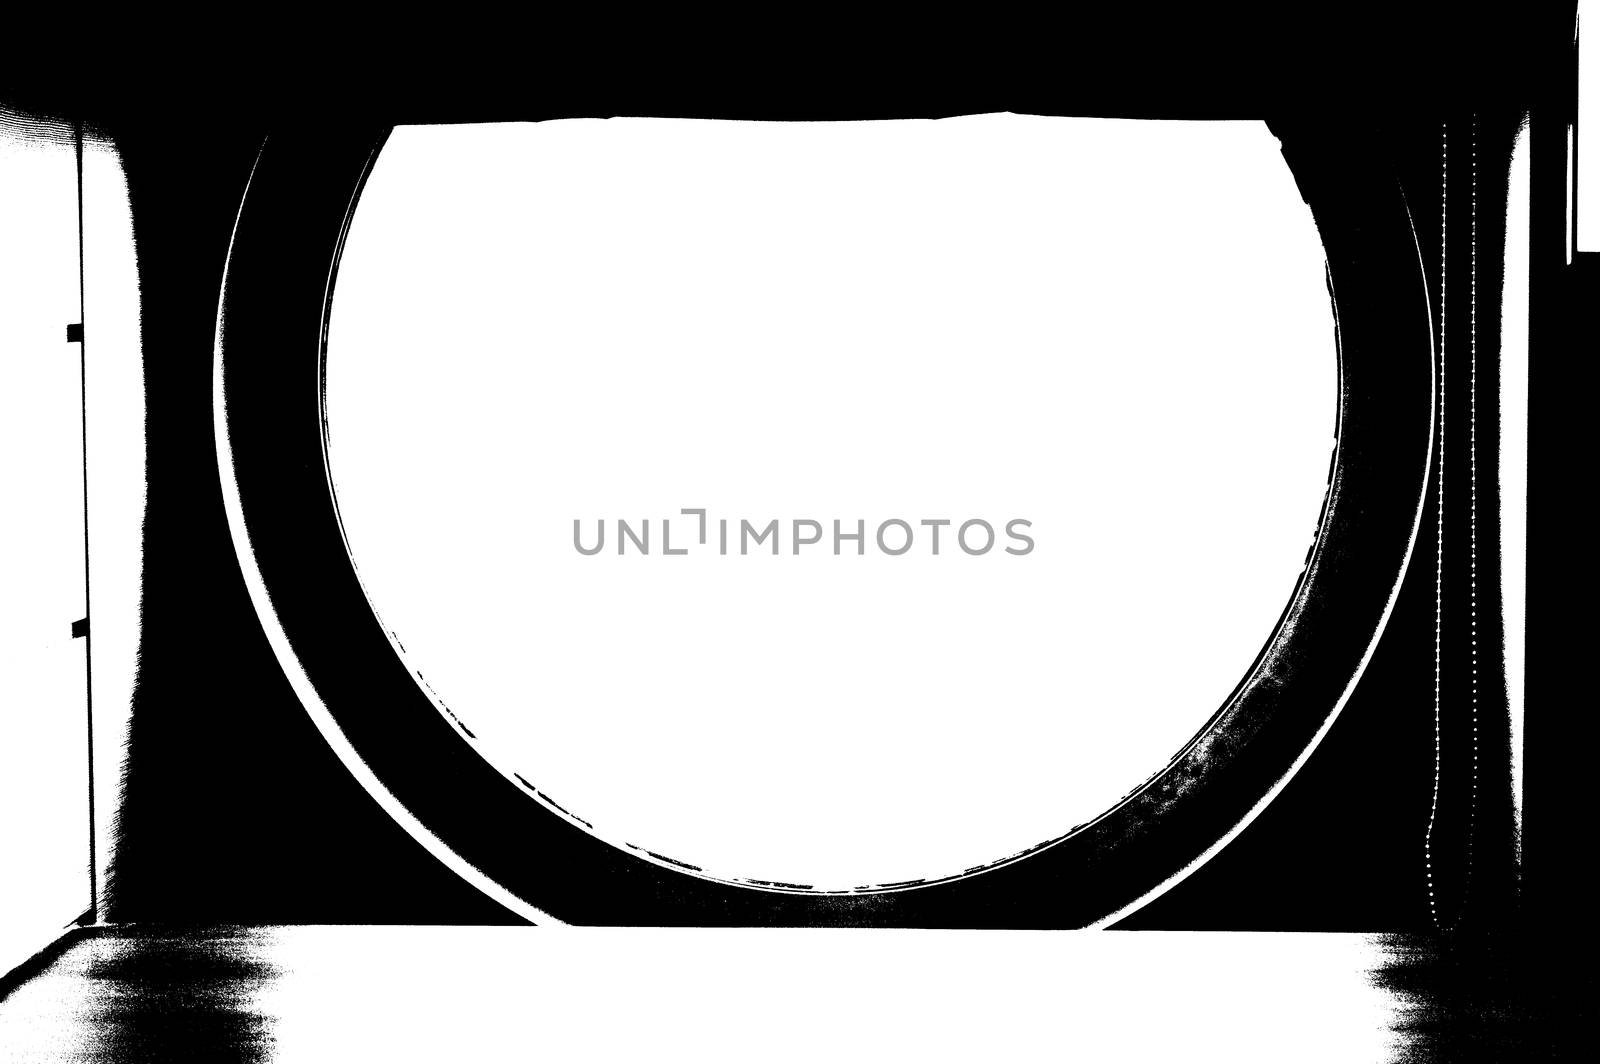 The porthole of the ship with the post processing in black and white by claire_lucia